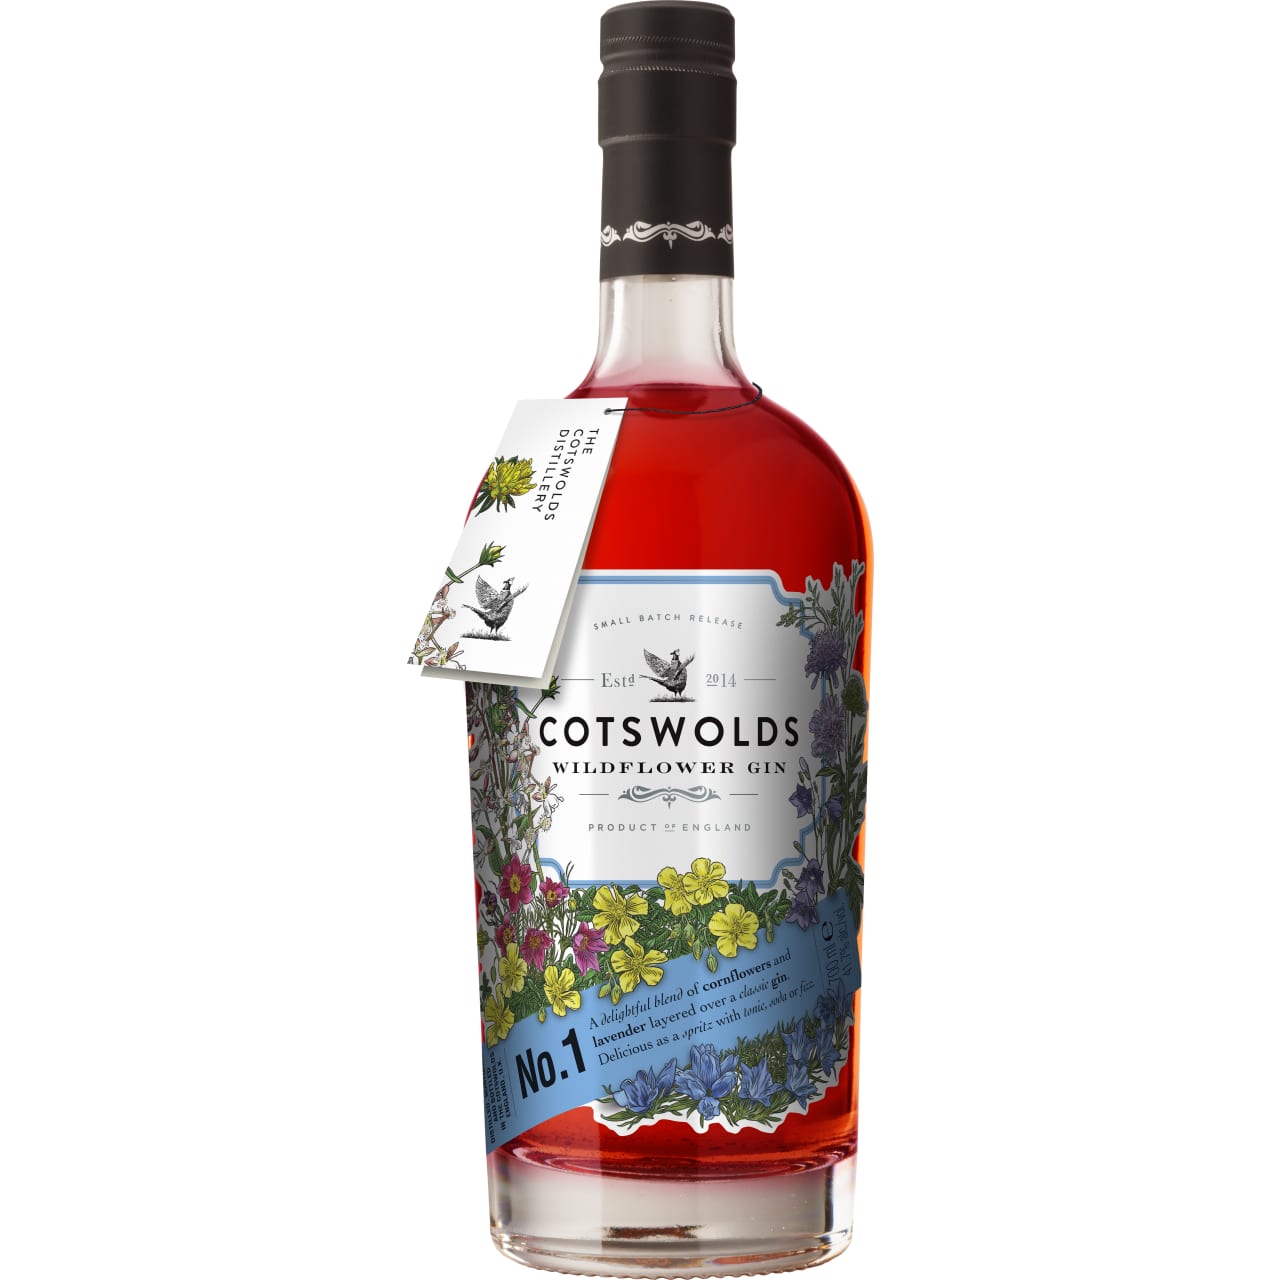 Product Image - Cotswolds Wildflower Gin No. 1